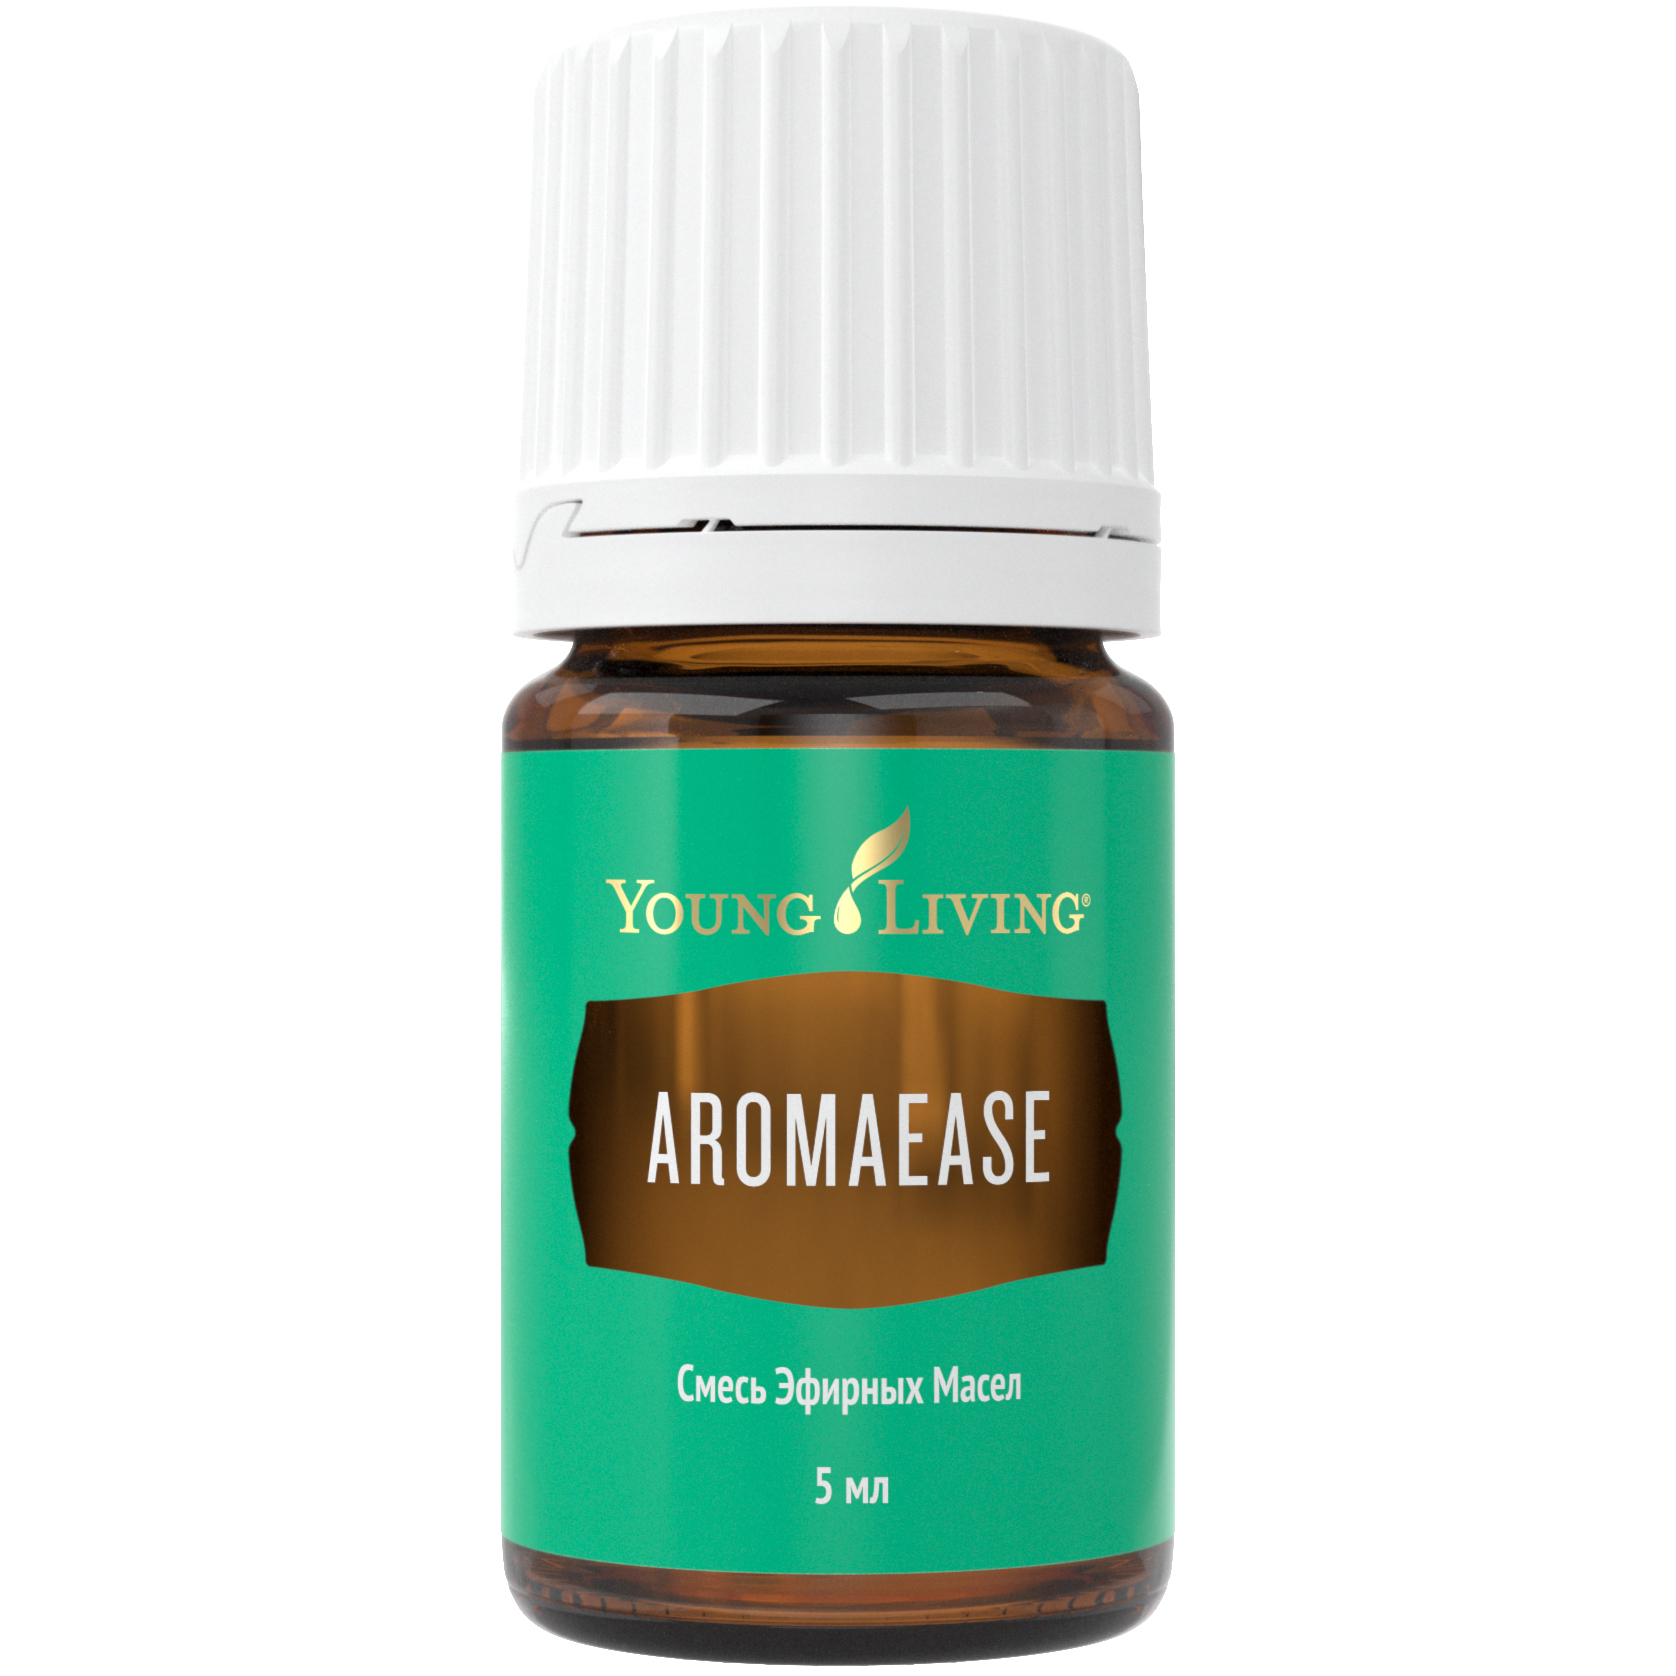 Aroma Ease Essential Oil Blend